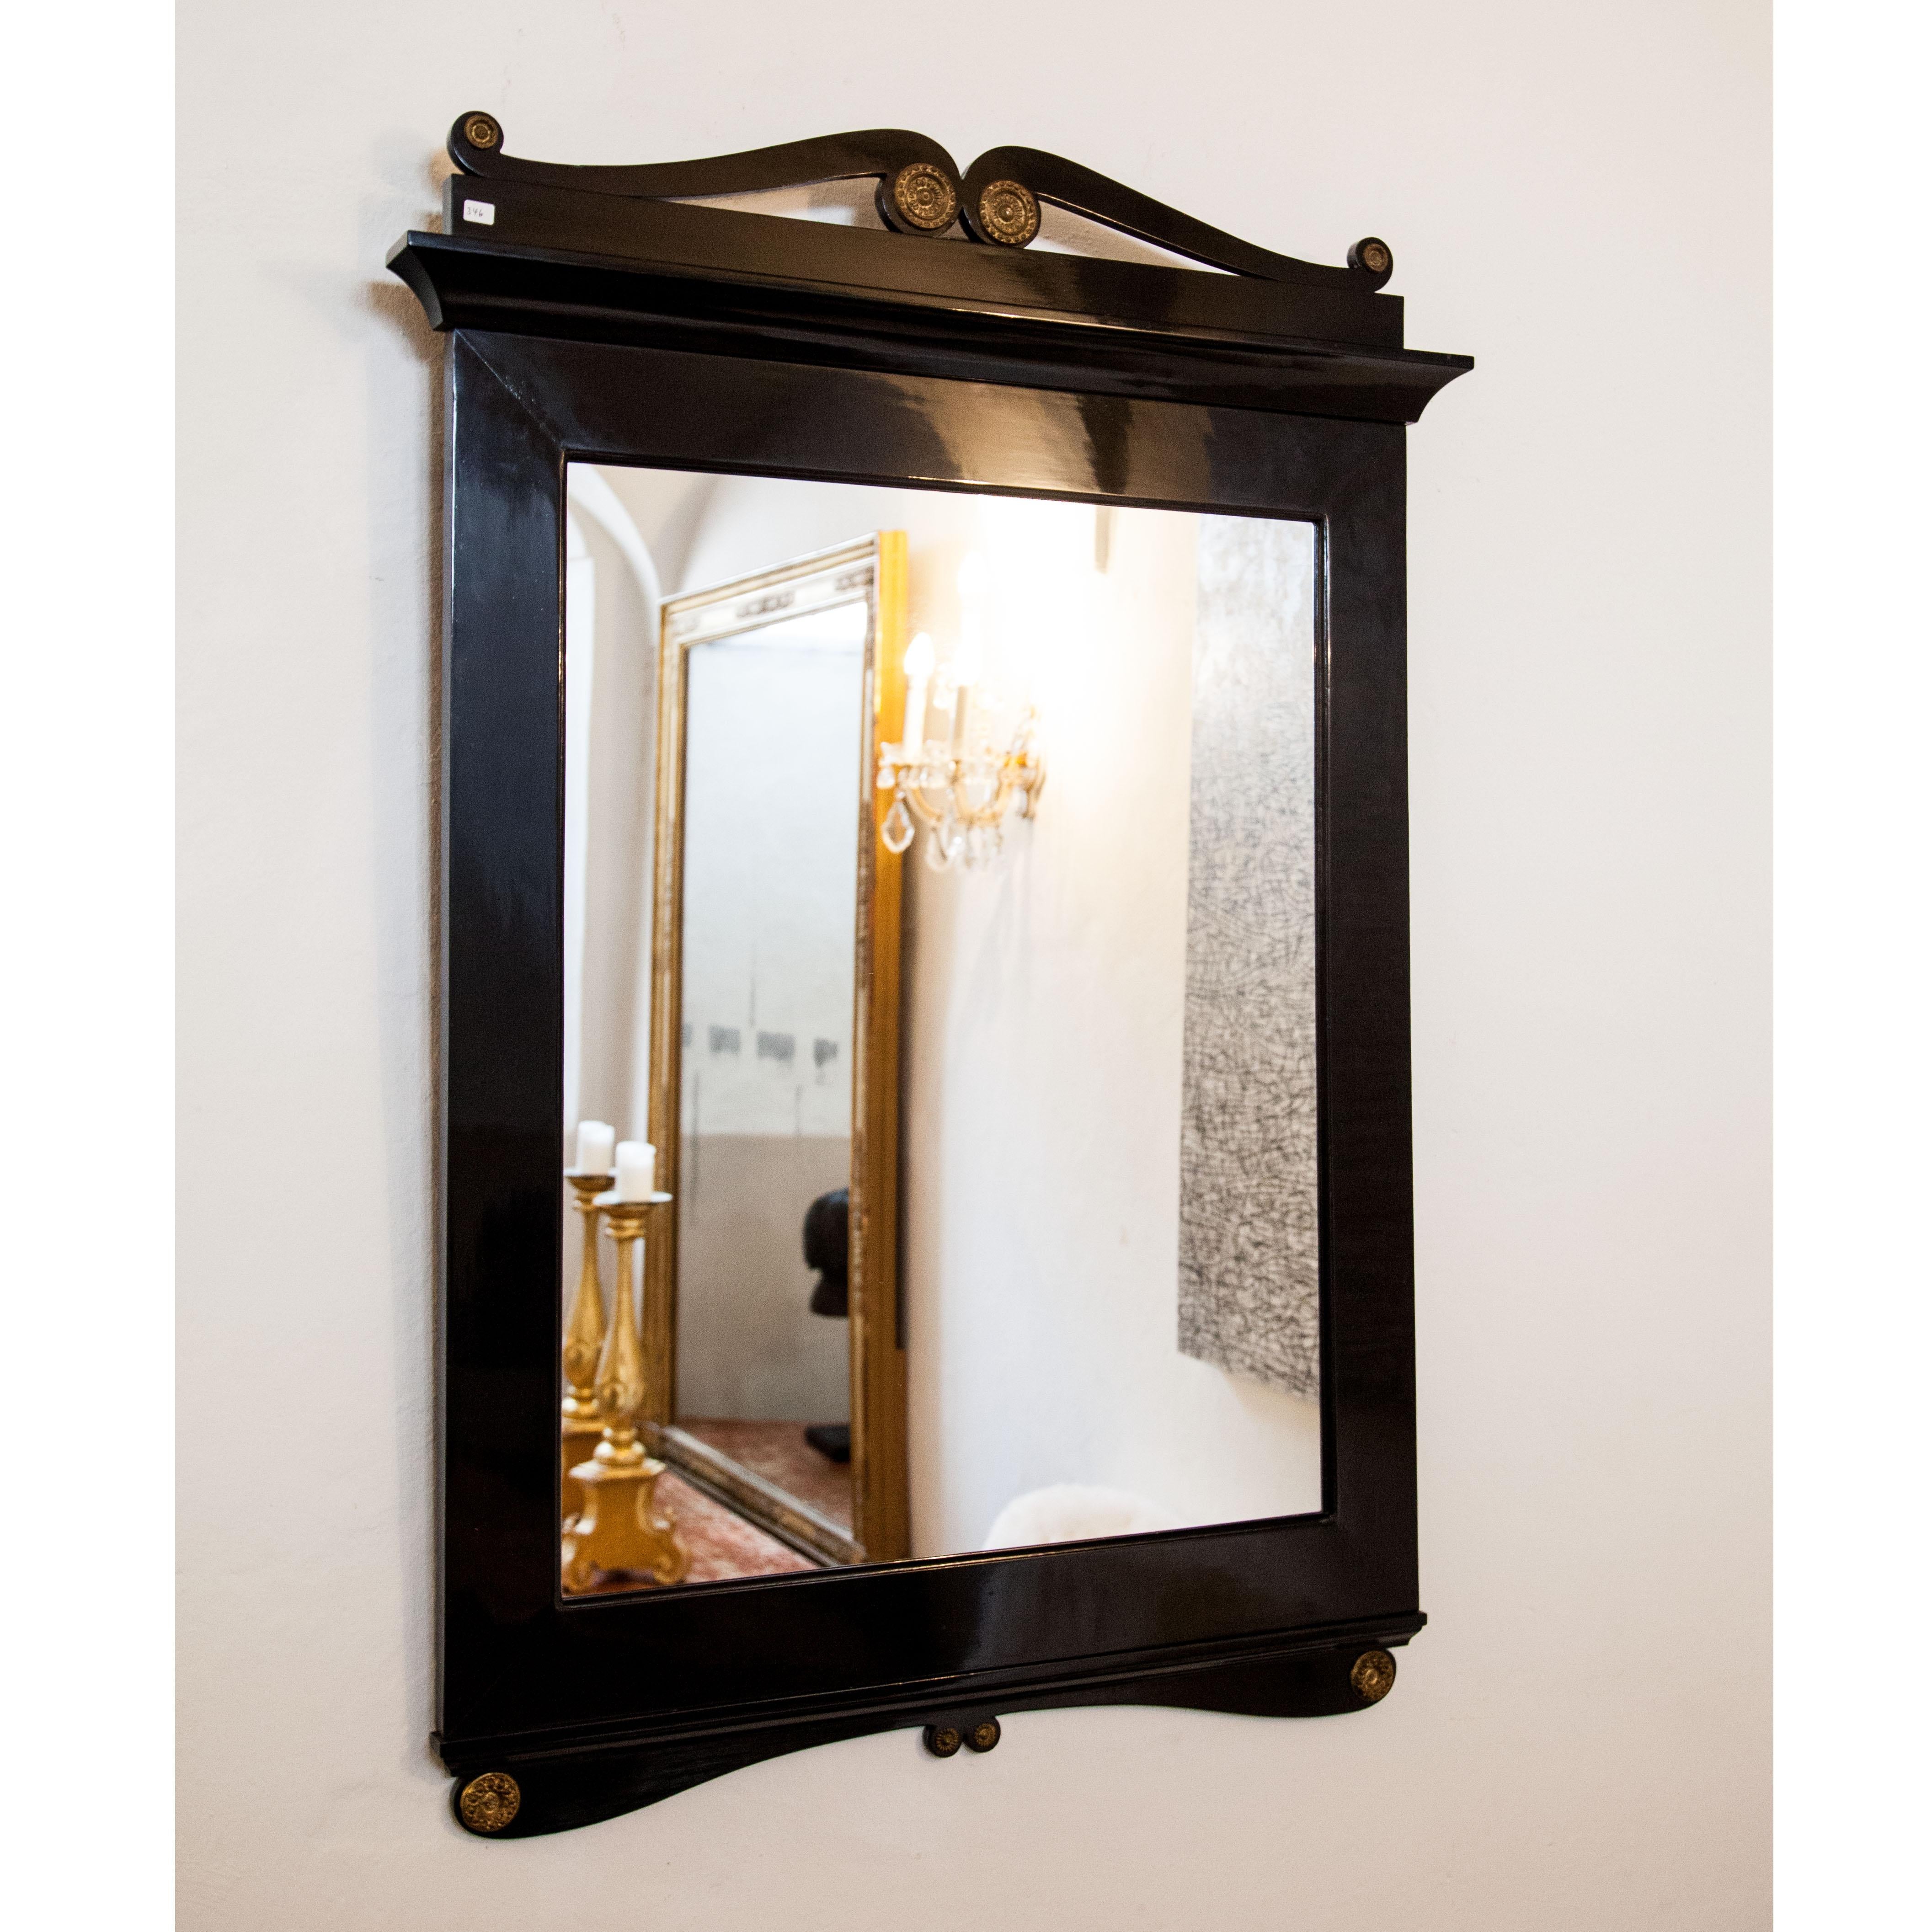 Biedermeier mirror in smooth ebonized wooden frame with rocaille decoration and bronze rosettes.